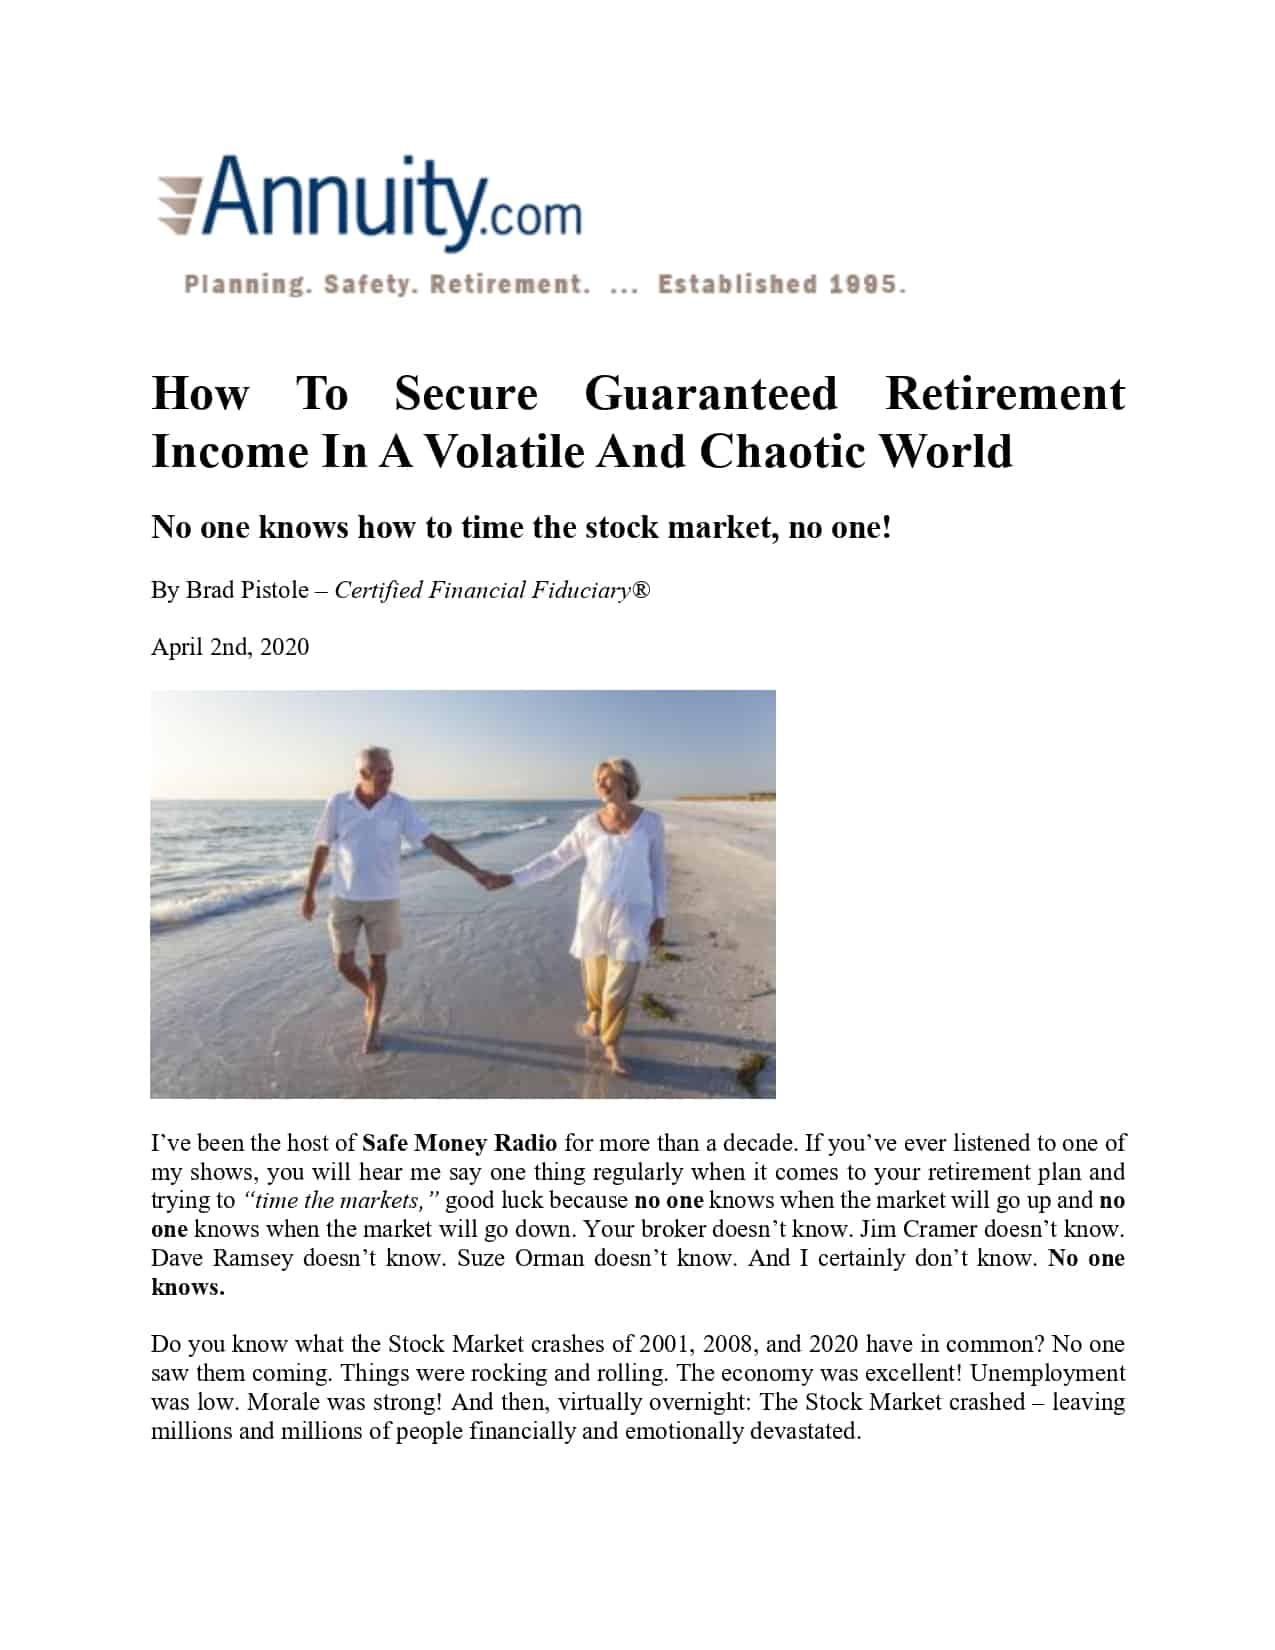 How To Secure Guaranteed Retirement Income in a Volatile and Chaotic World